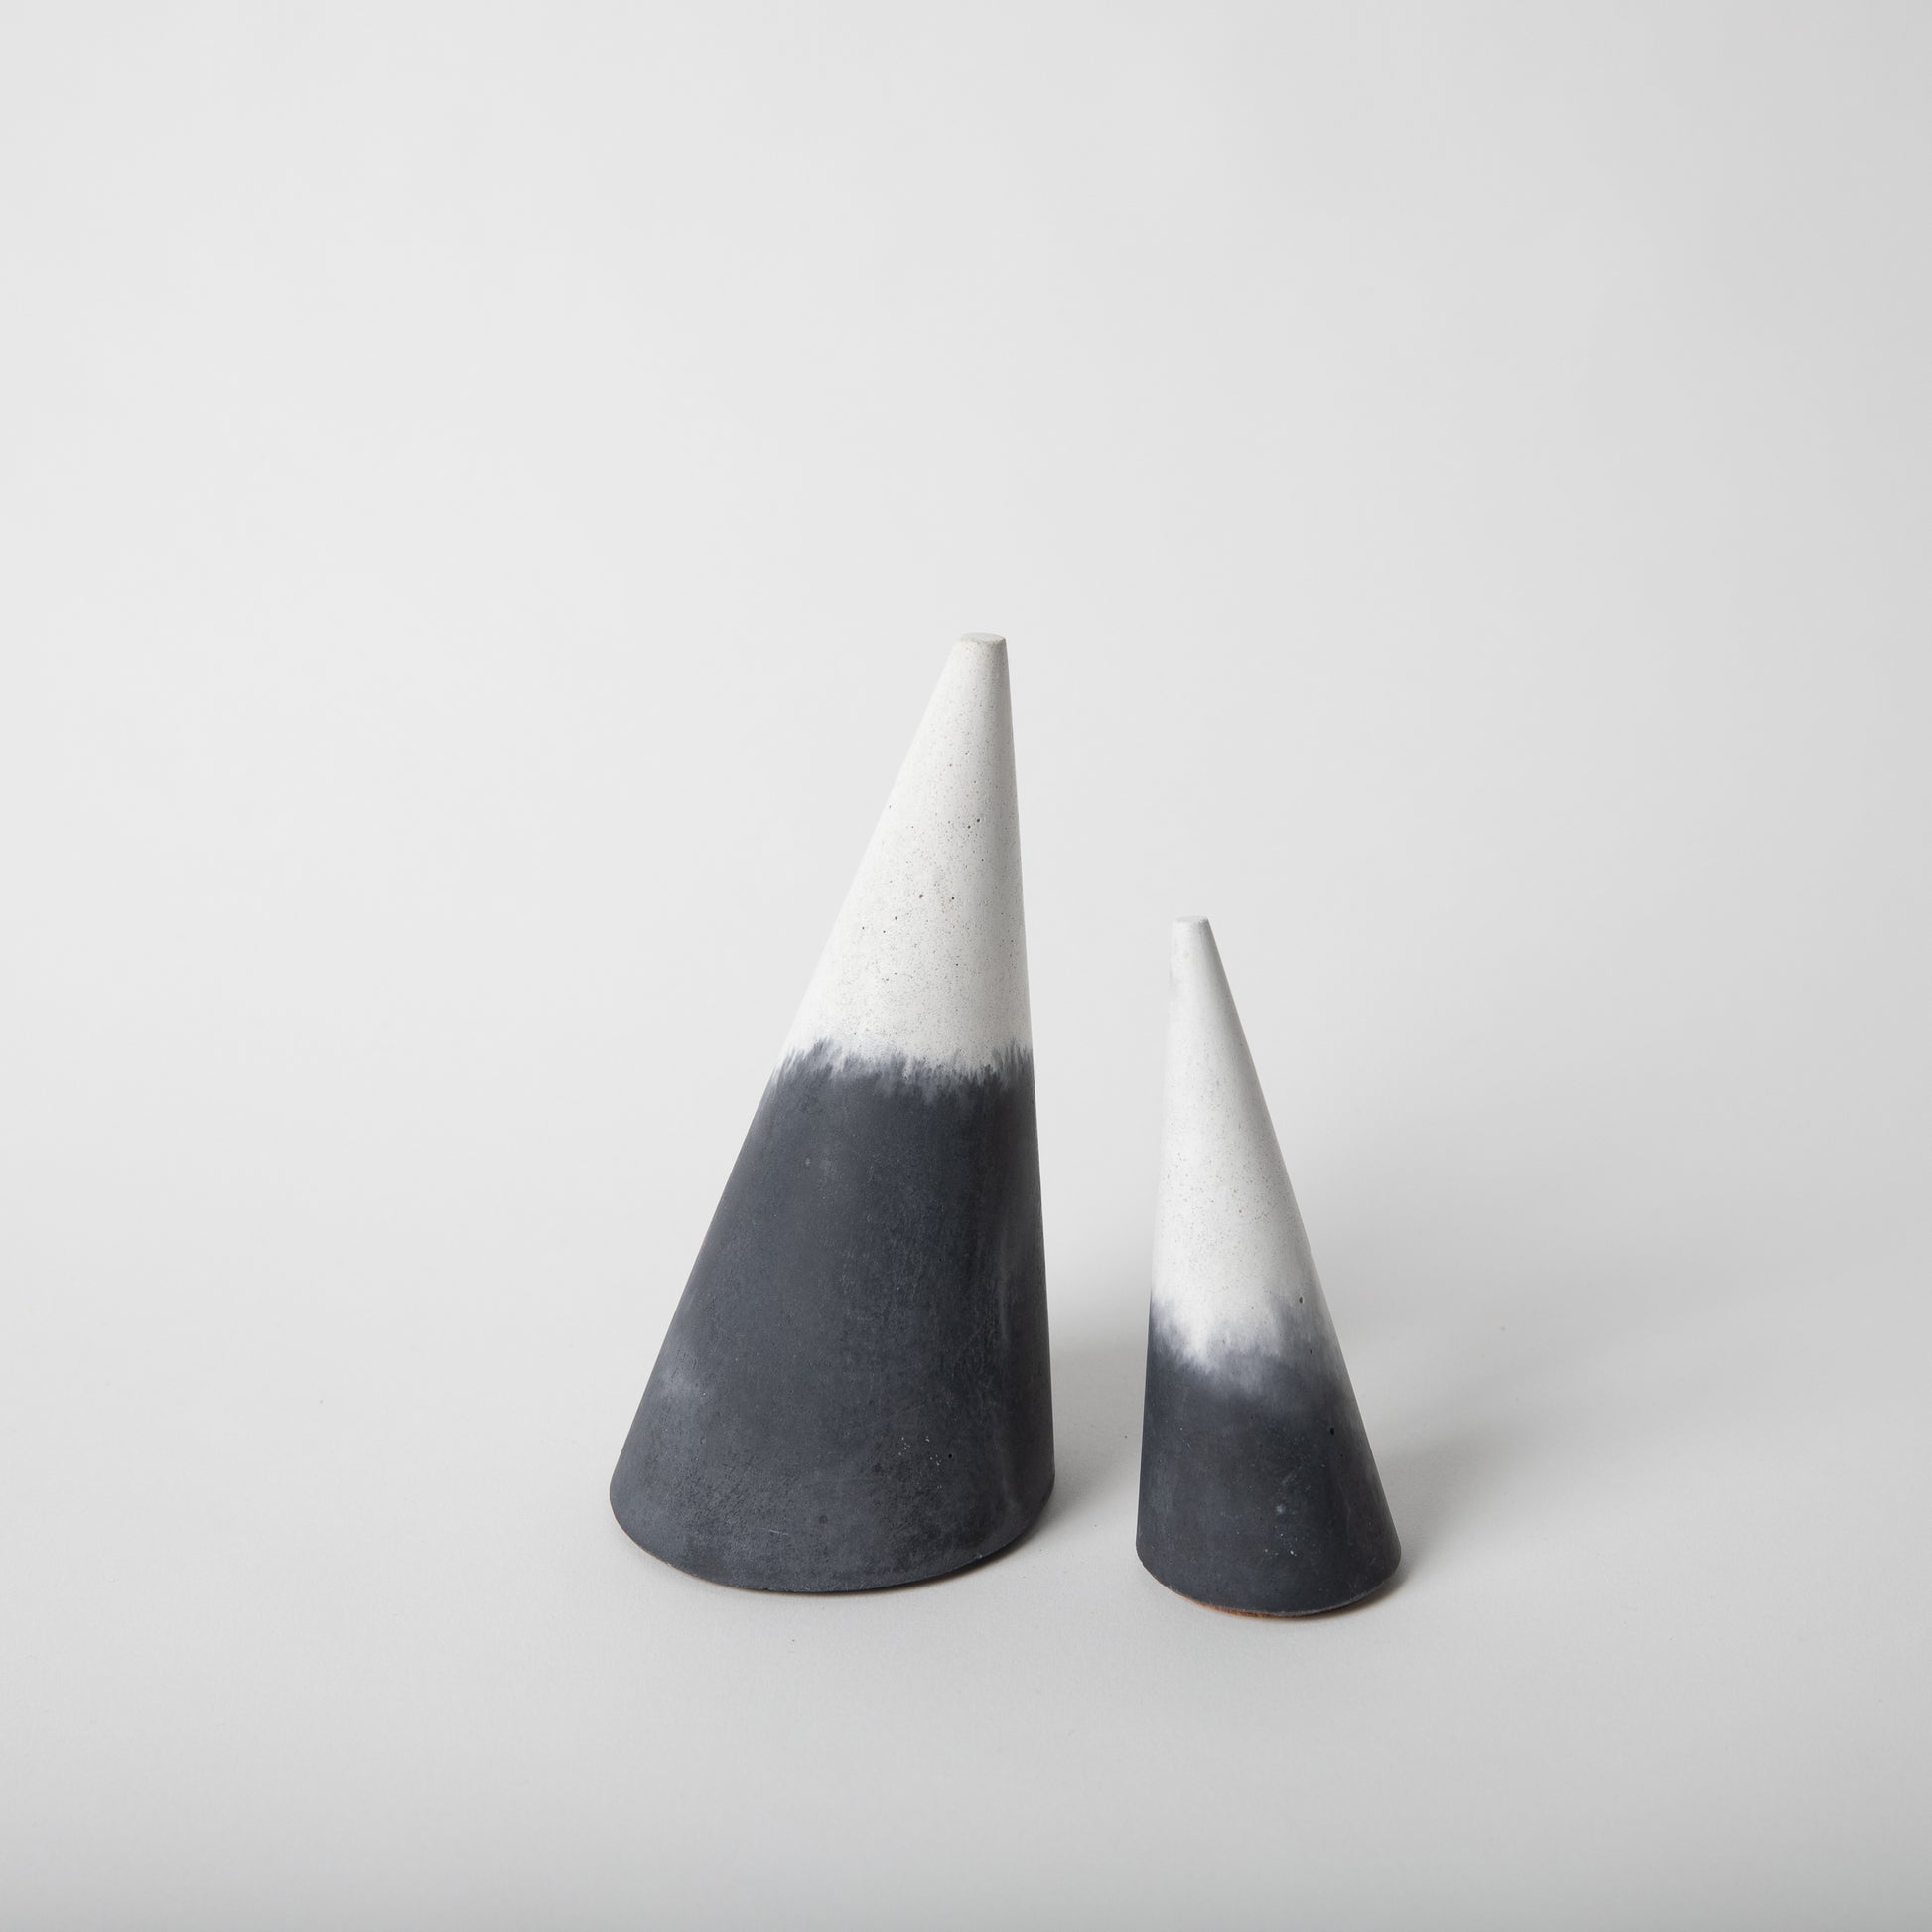 Cone shaped concrete jewelry holder with cork base in black and white.